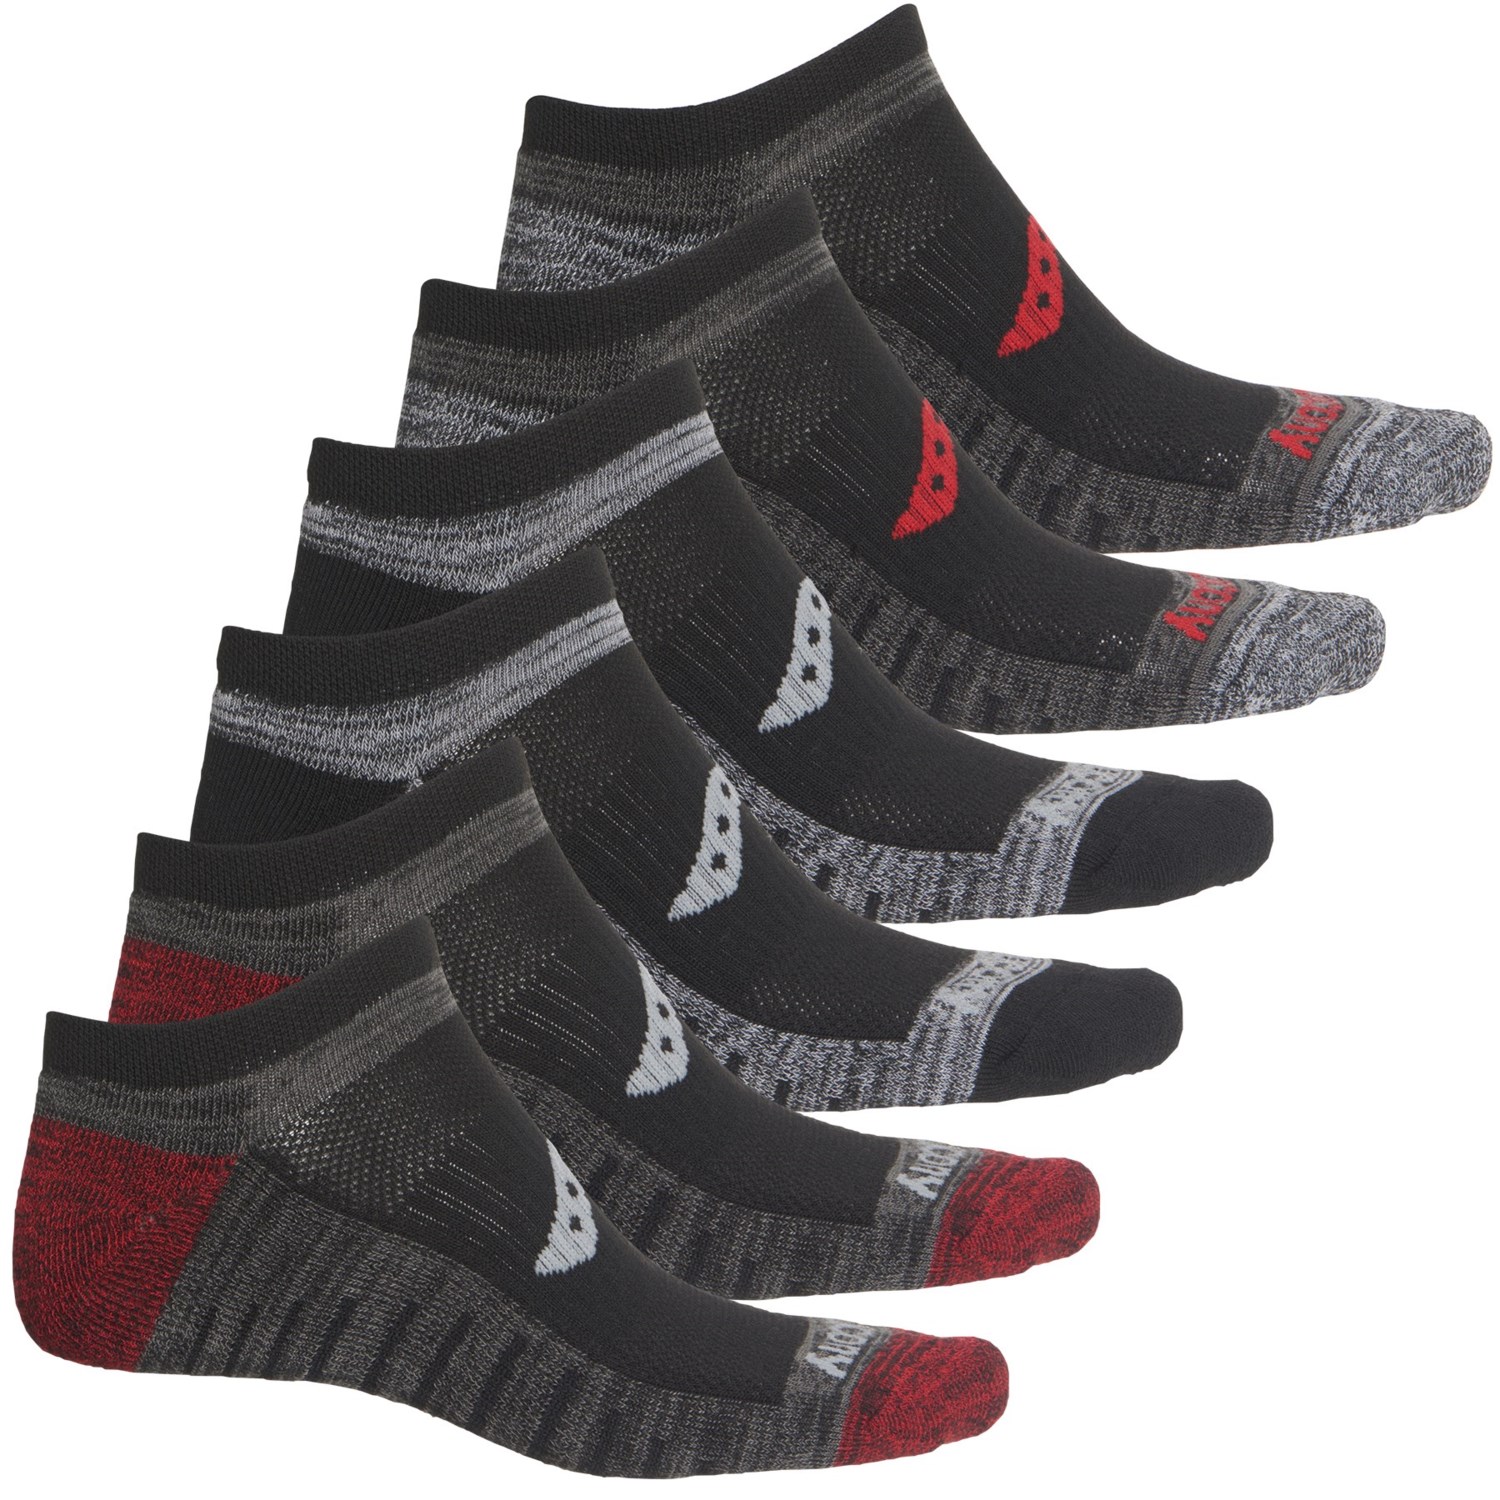 saucony competition series socks